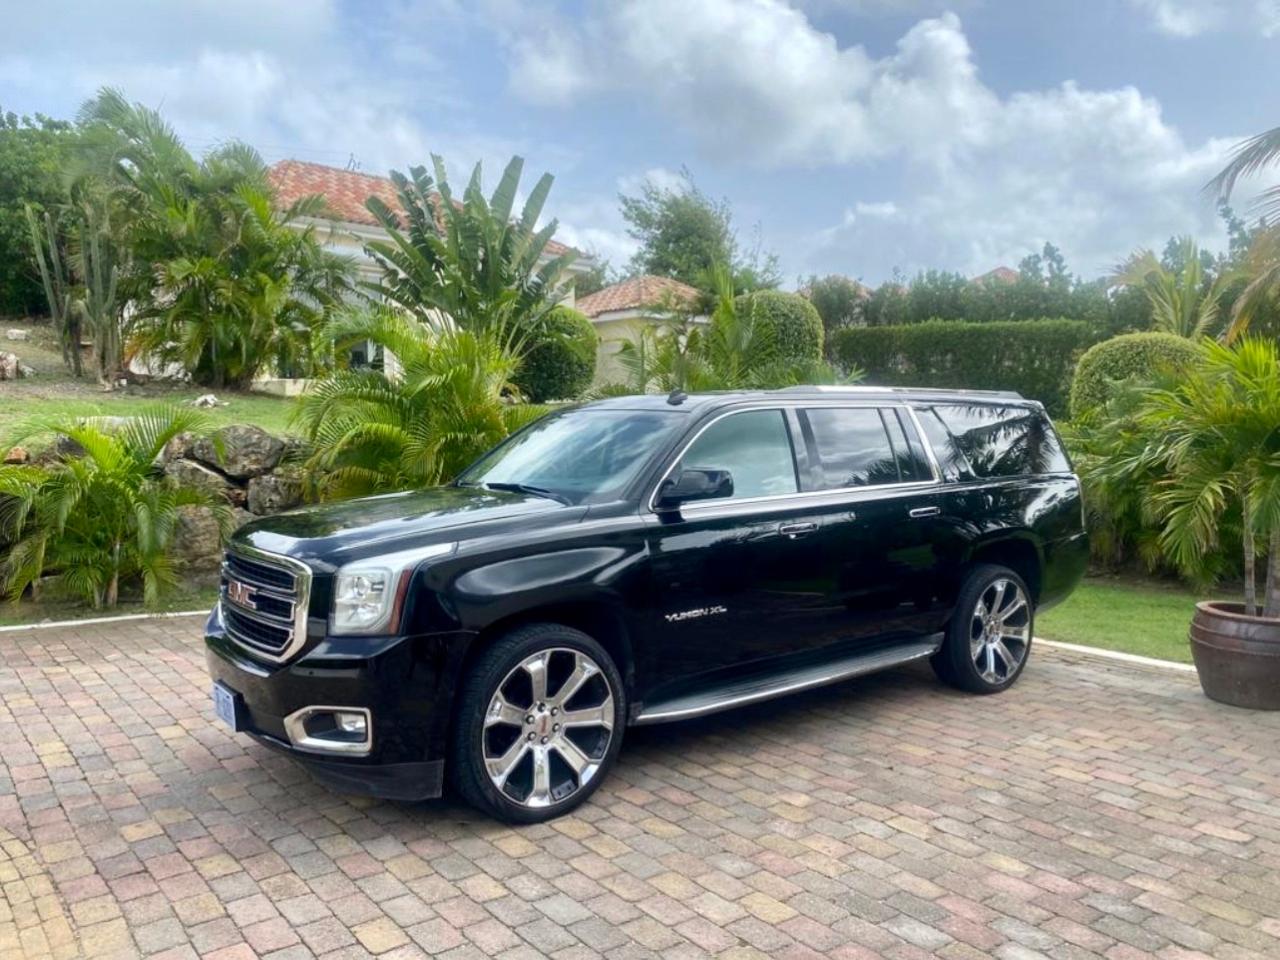 VIP Arrival Transfer to St. Maarten/St. Martin Hotel (Zone 4)